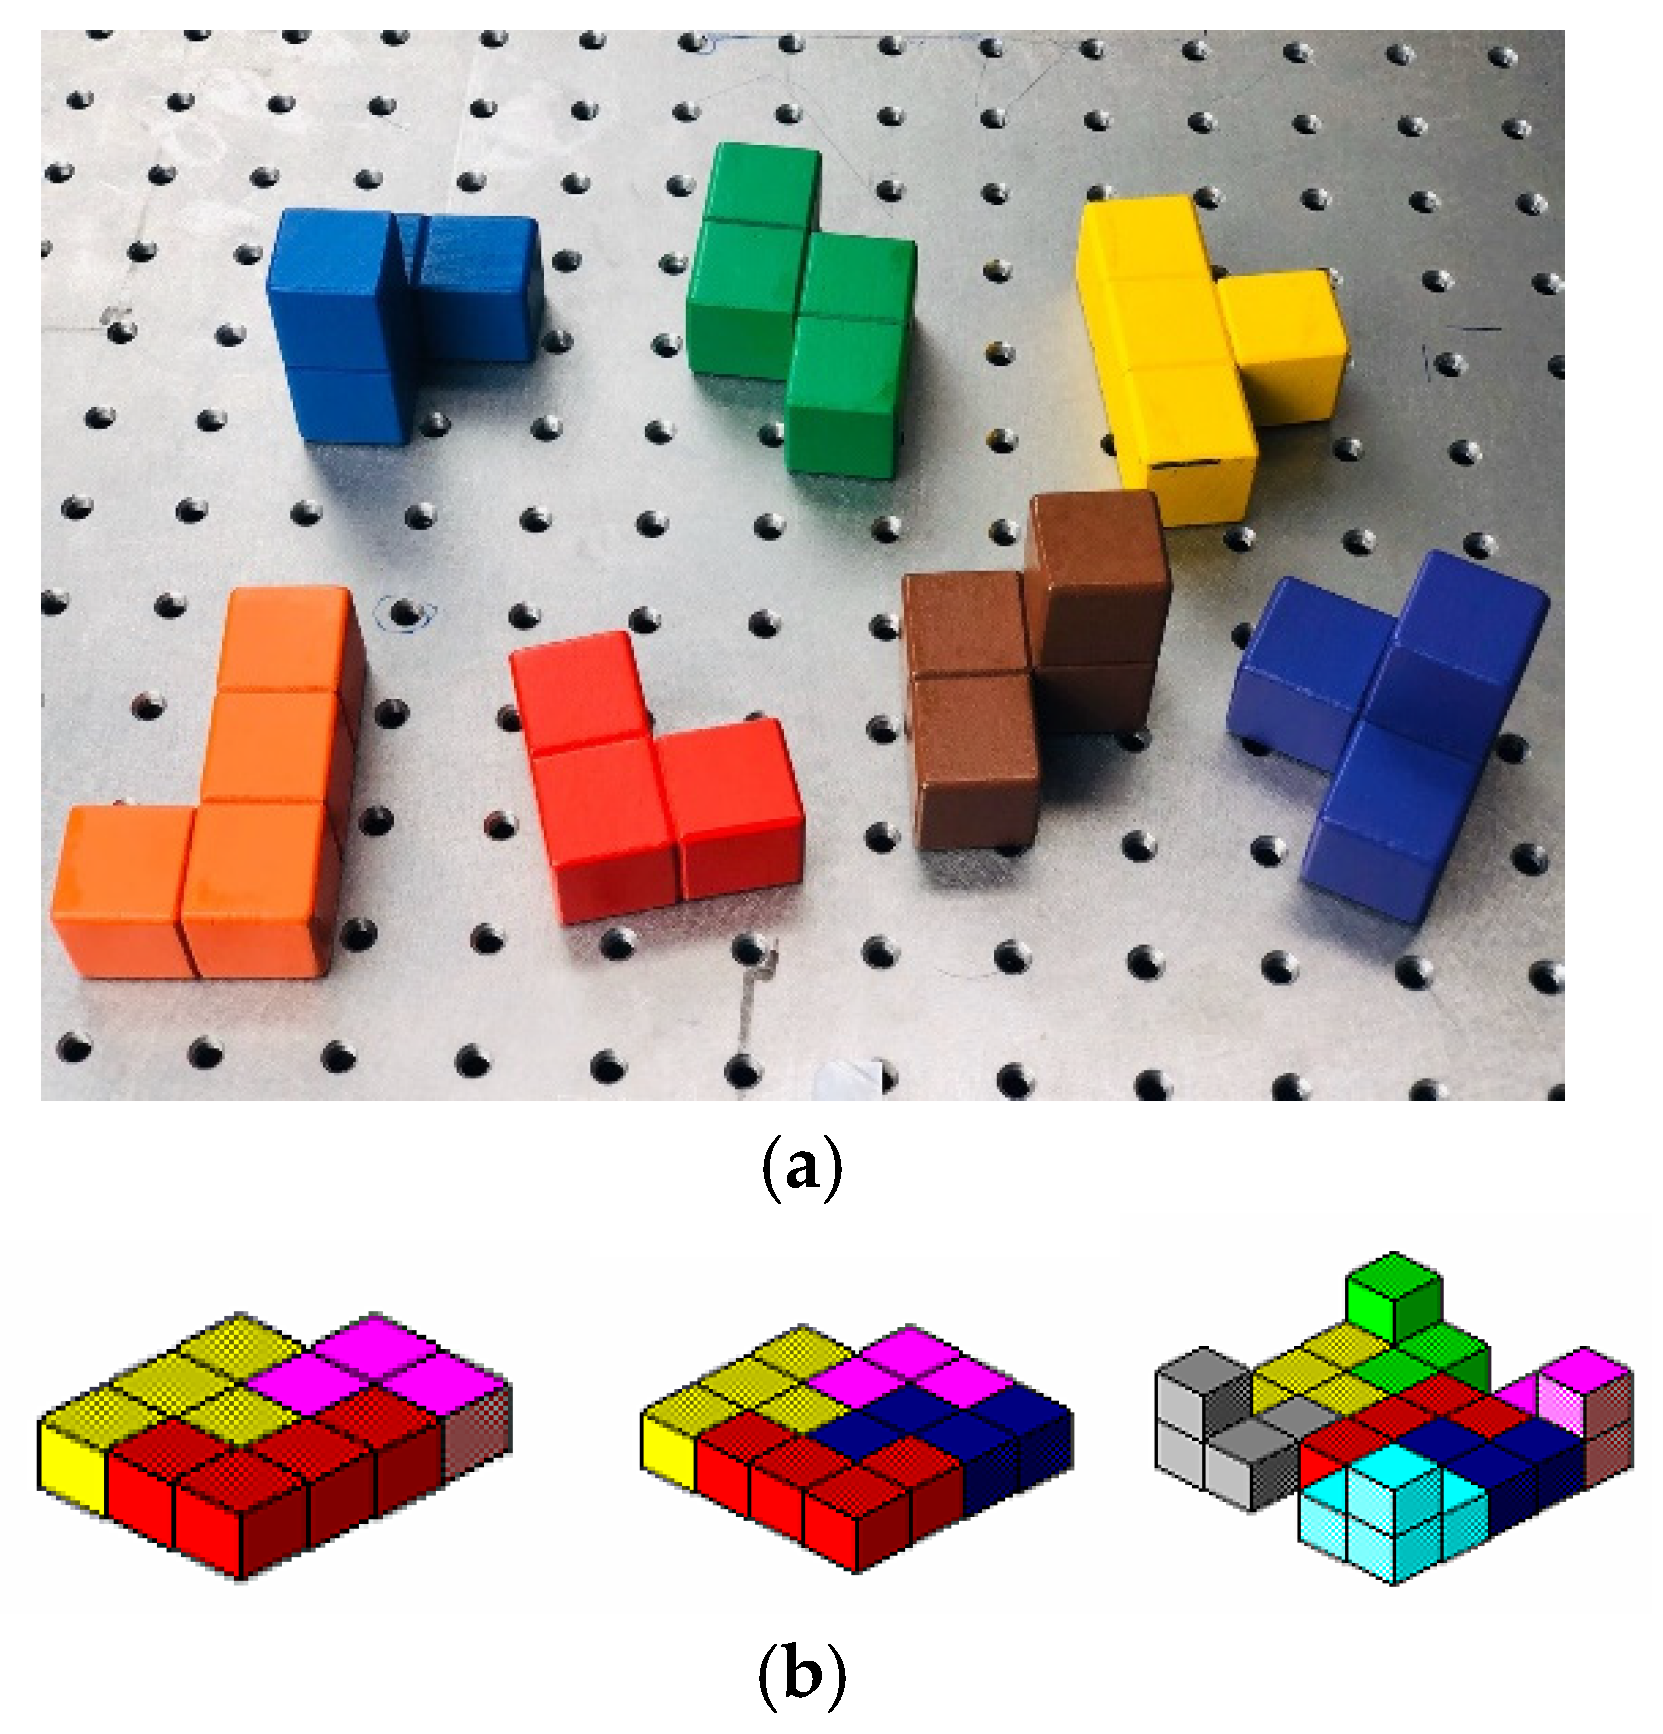 Applied Sciences | Free Full-Text | Scattering or Pushing for Object  Singulation in Cluttered Environment: Case Study with Soma Cube